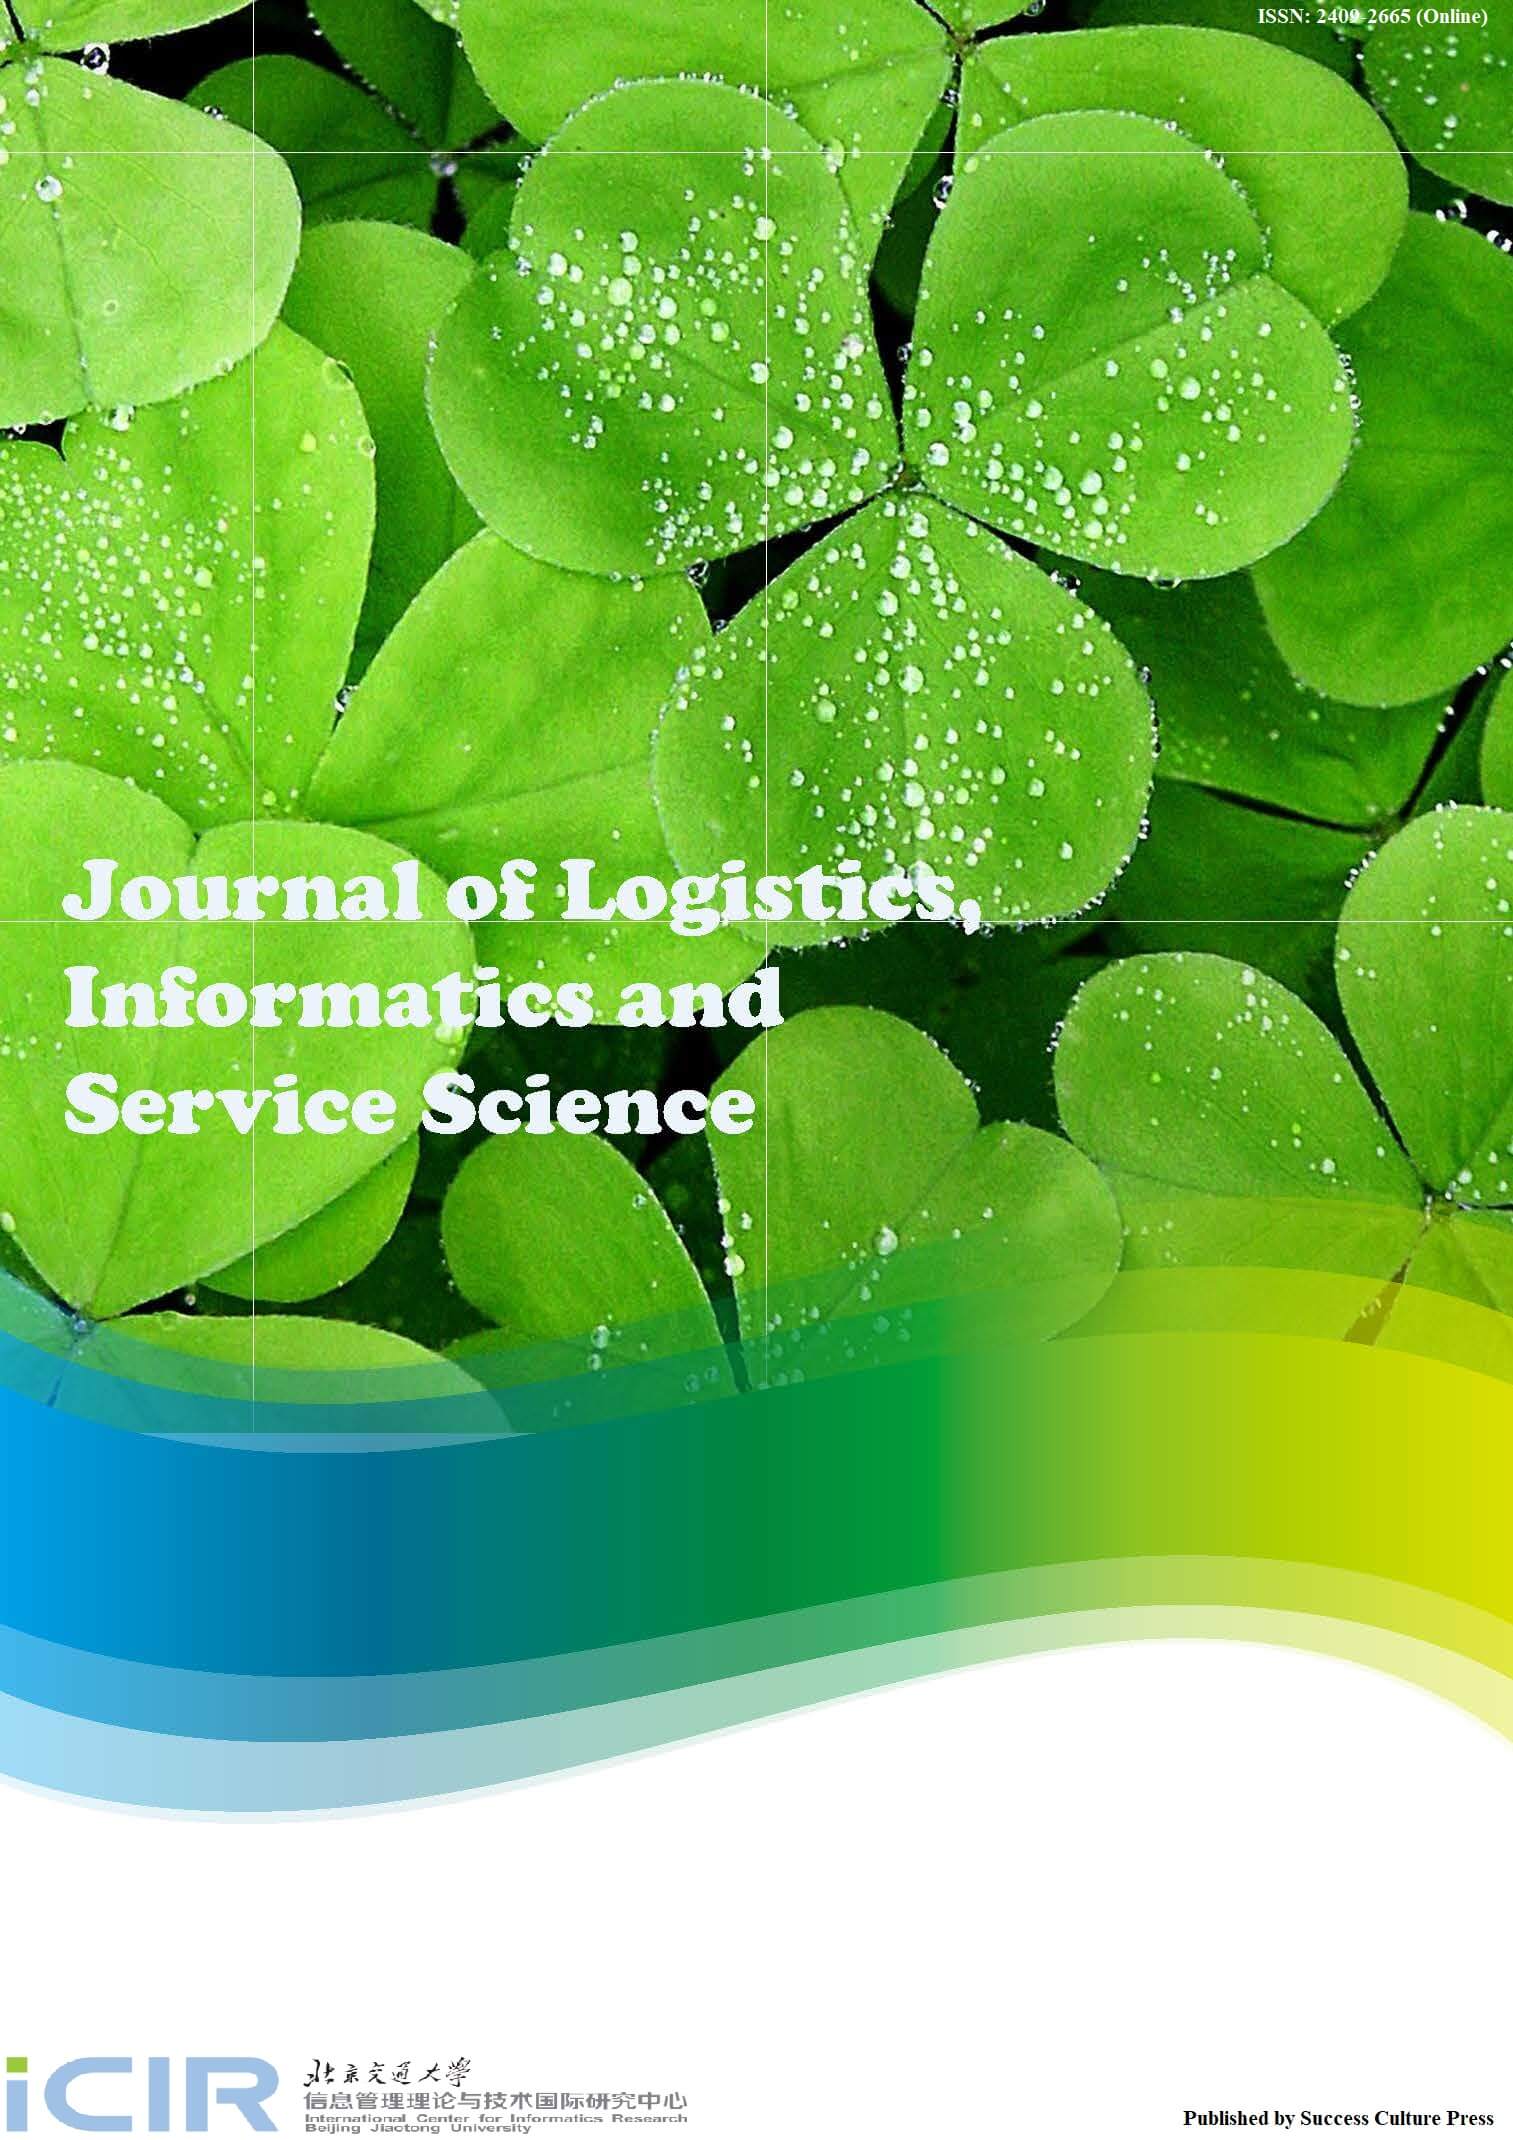  Journal of Logistcs, Informatics and Service Science